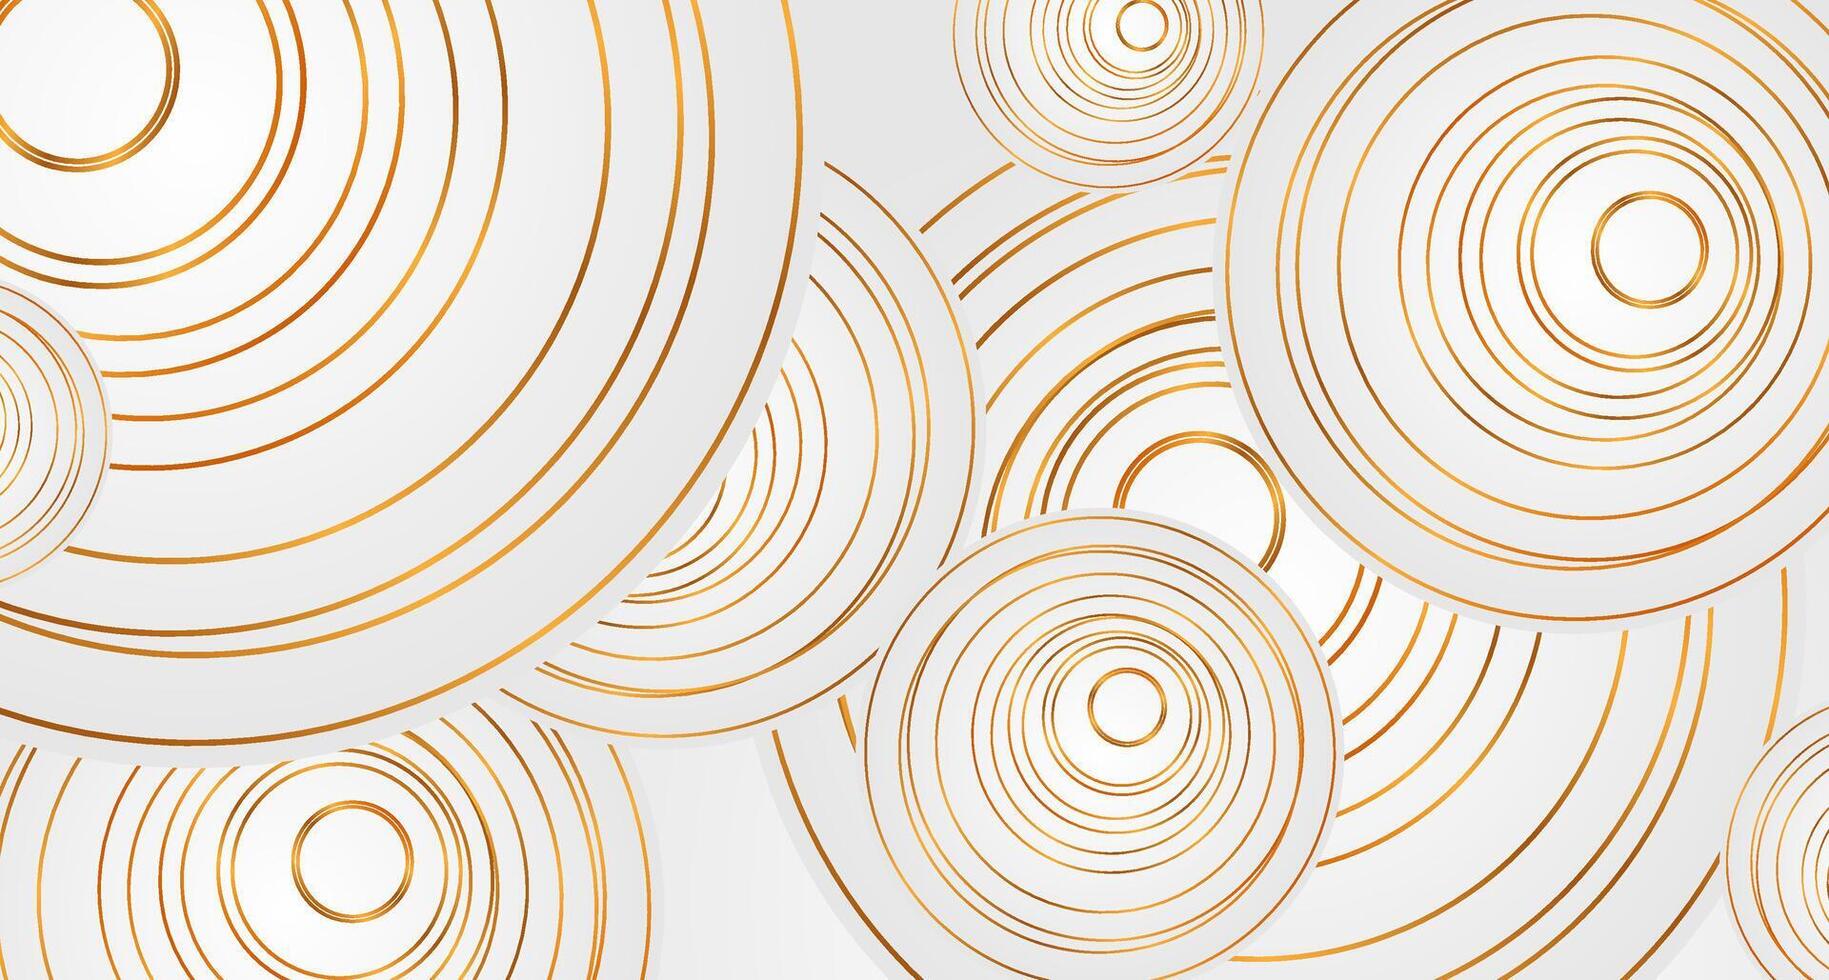 Grey and golden circles abstract luxury geometric background vector